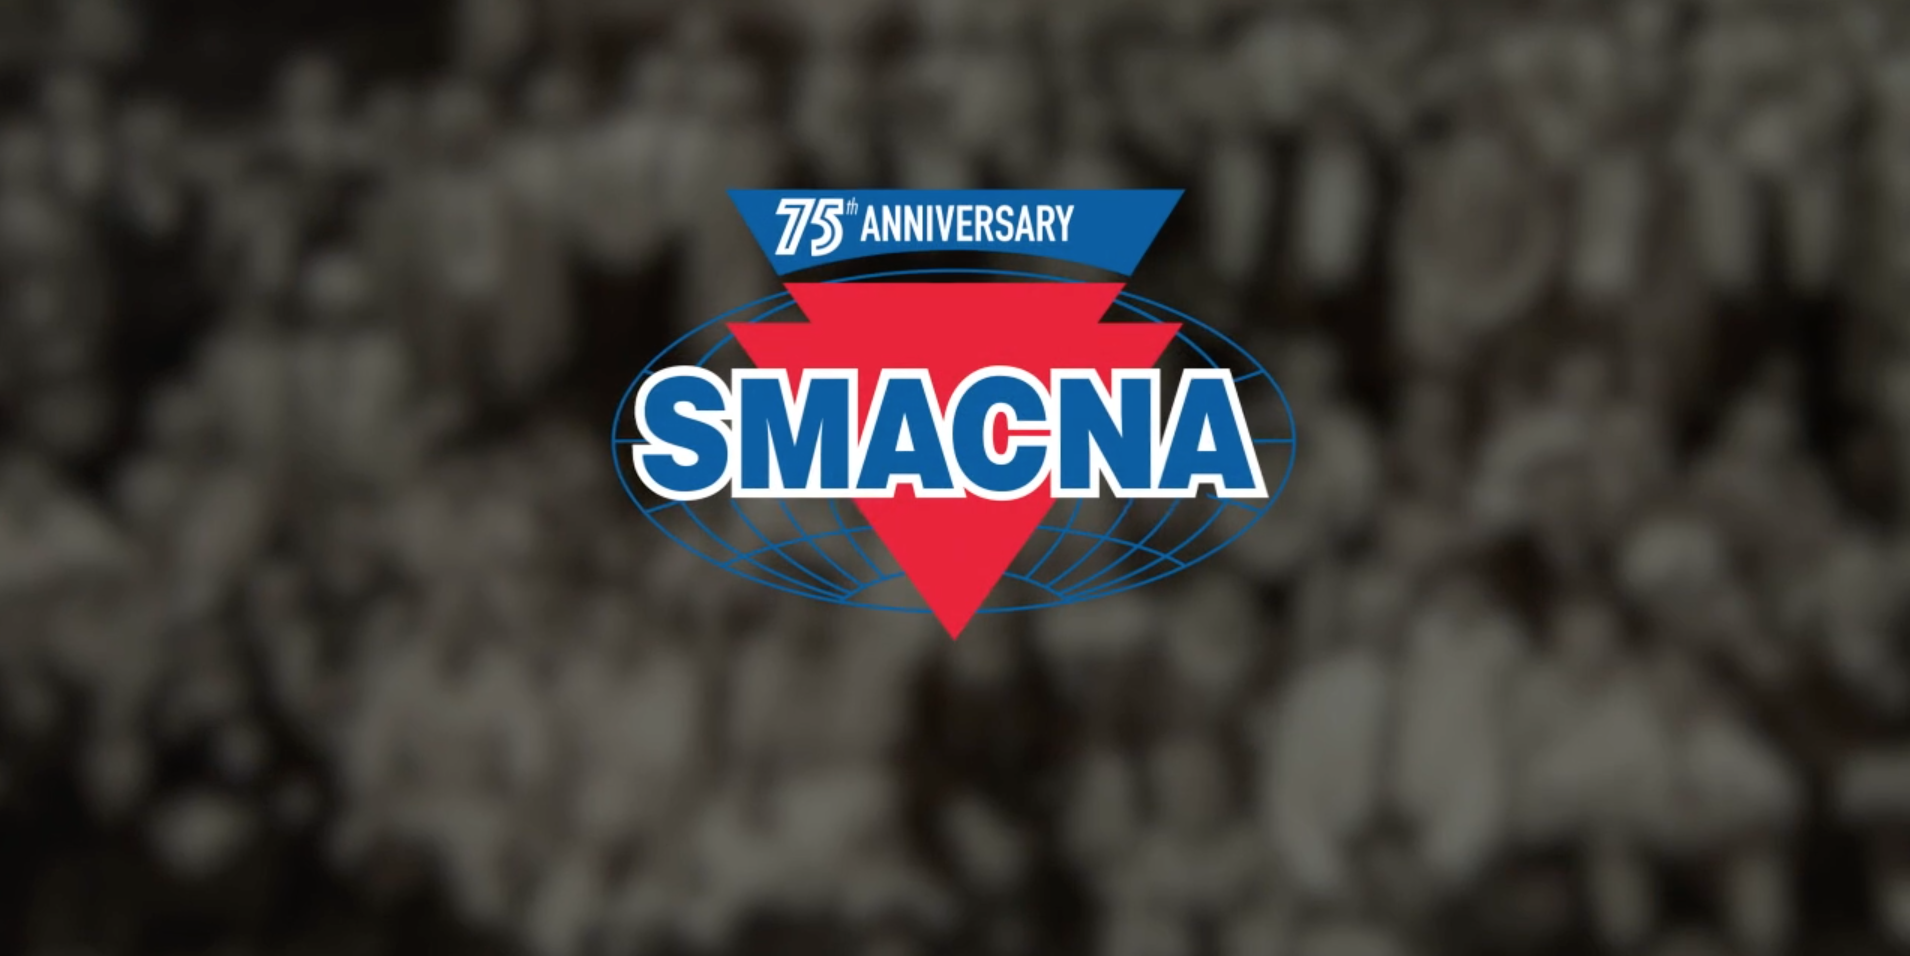 SMACNA: A Nod to the Past, Focused on the Future